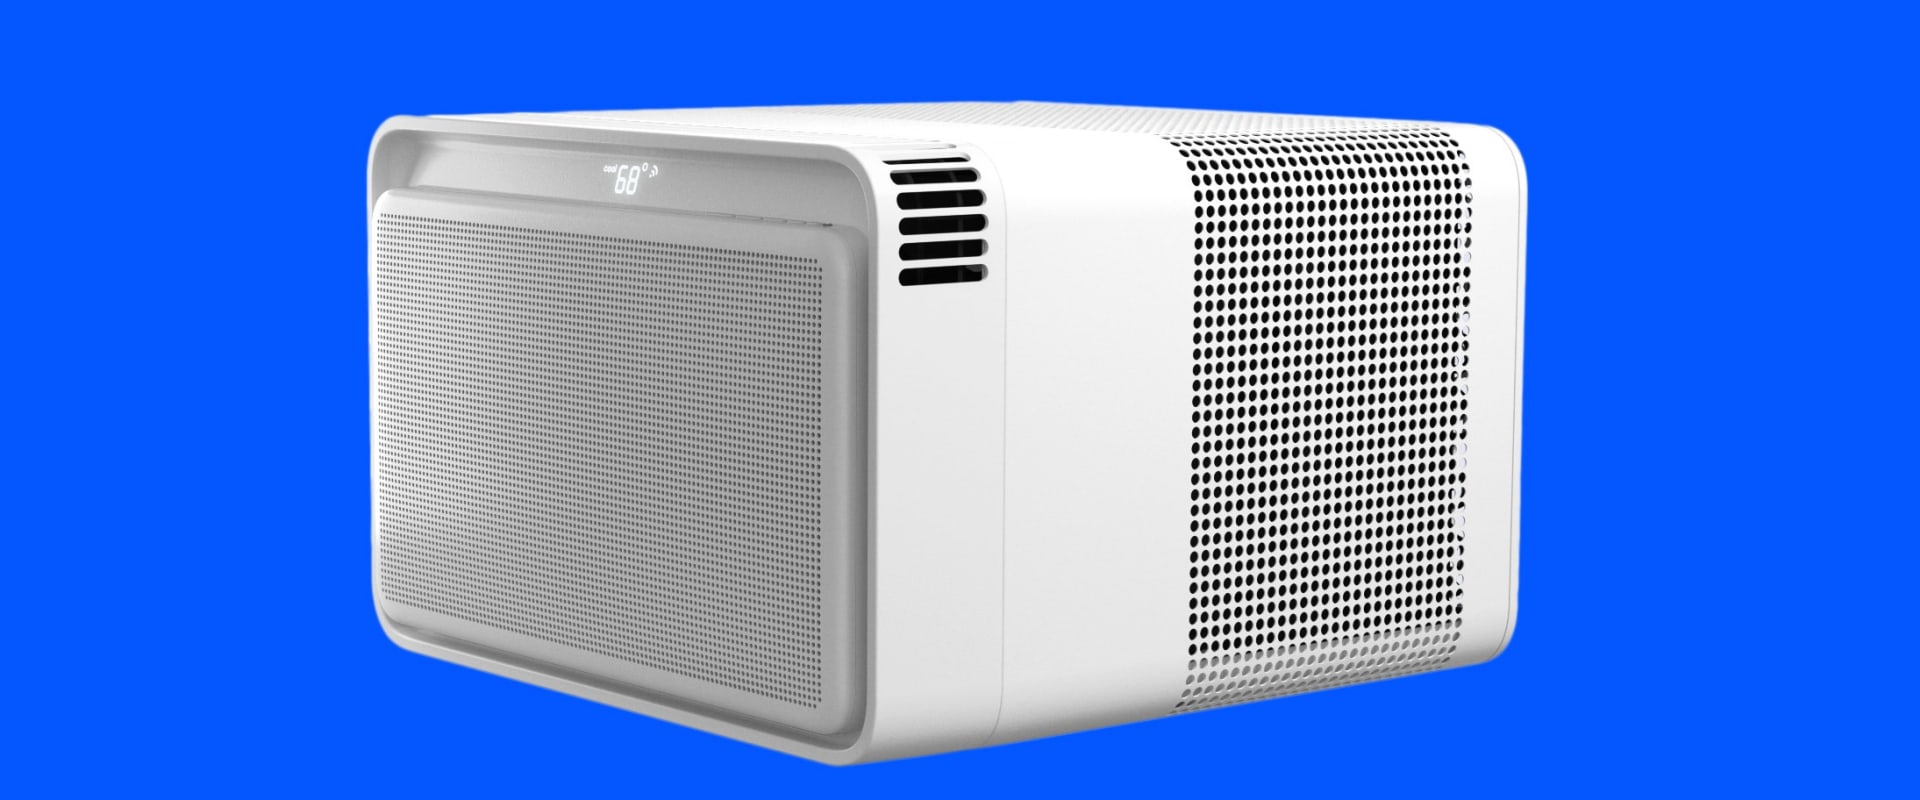 Which ac brand lasts the longest?